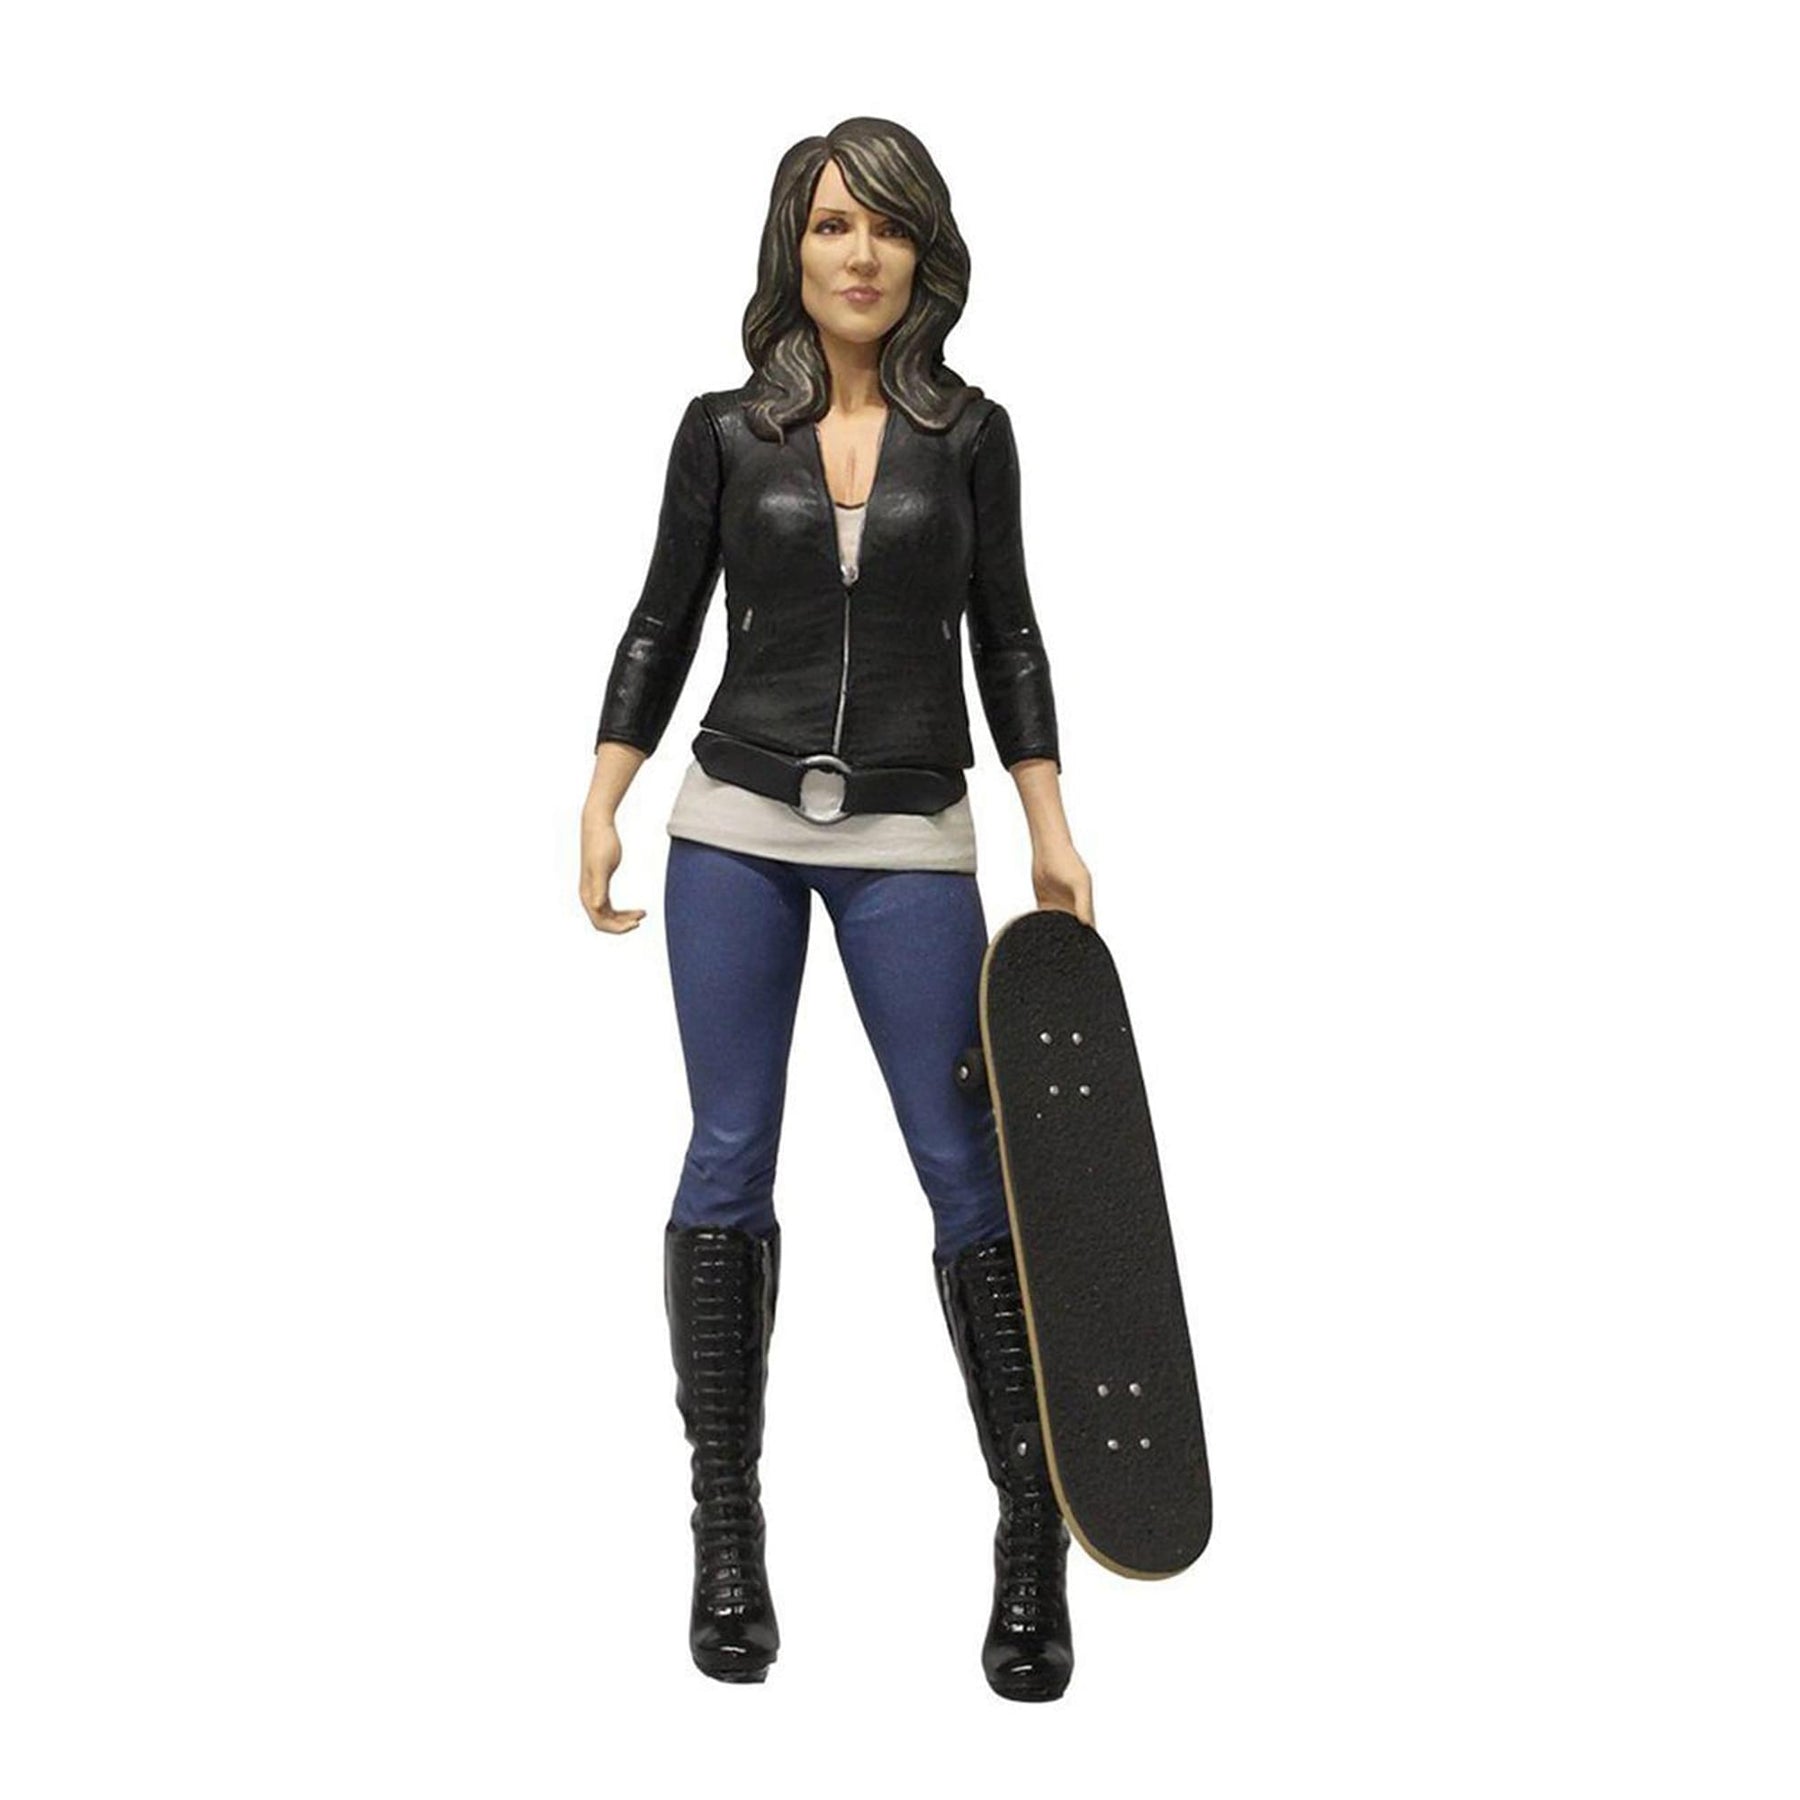 Sons of Anarchy 6" Action Figure Gemma Teller Morrow